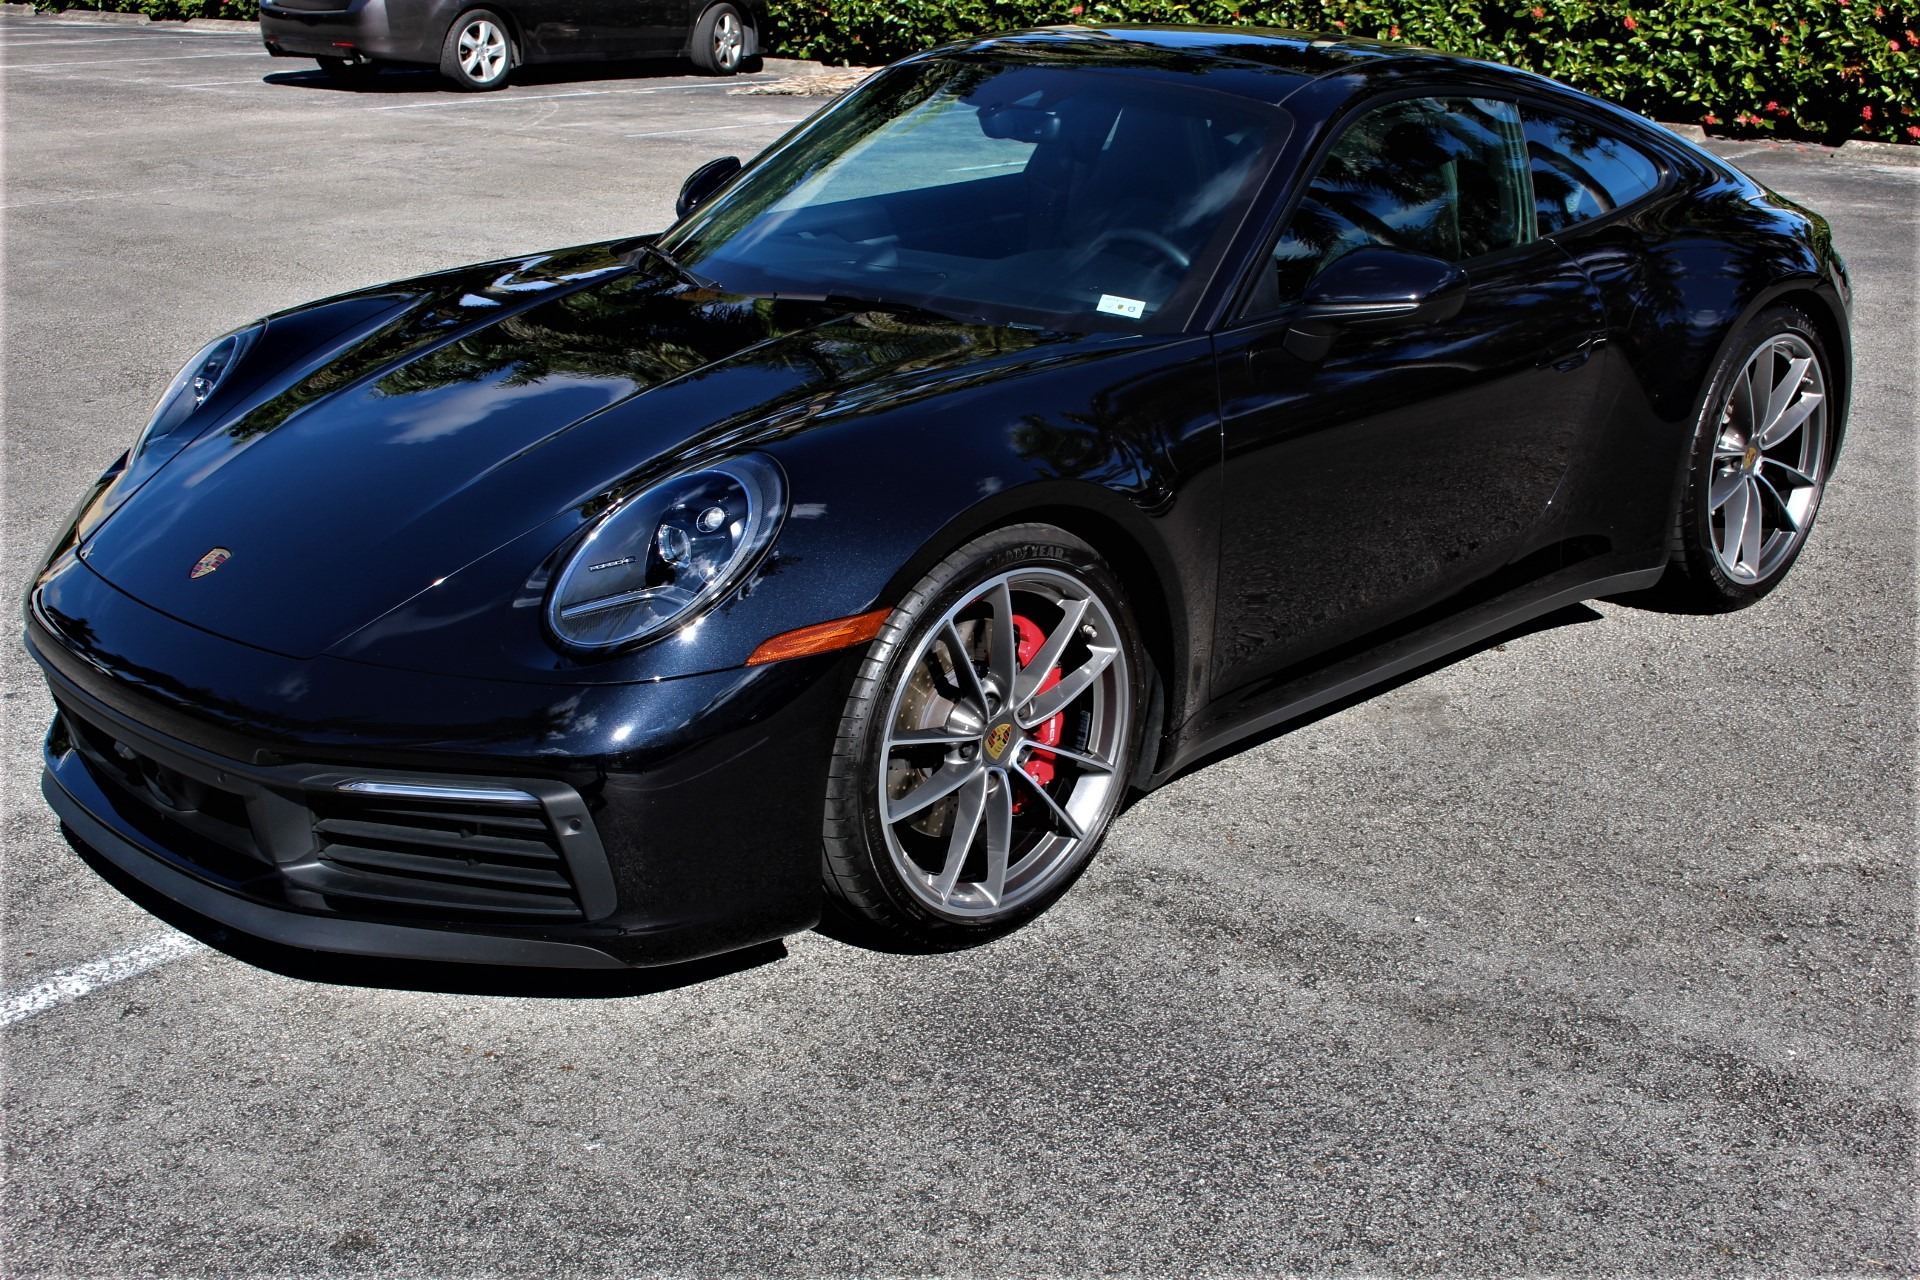 Used 2020 Porsche 911 Carrera S for sale Sold at The Gables Sports Cars in Miami FL 33146 4